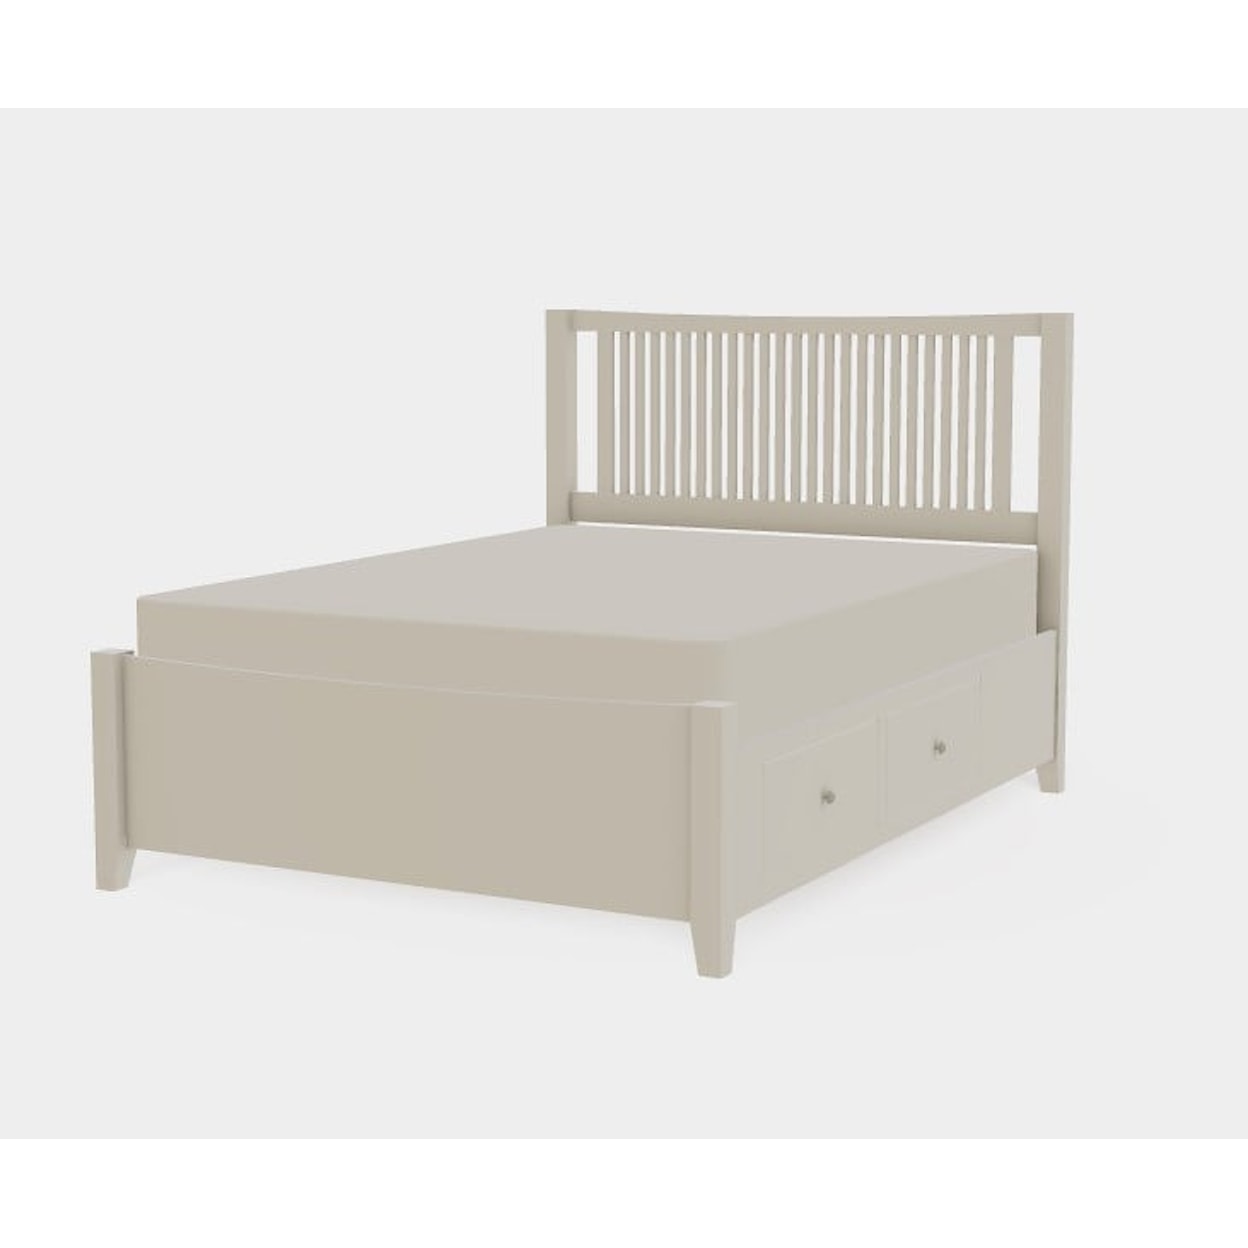 Mavin Atwood Group Atwood Queen Both Drawerside Spindle Bed